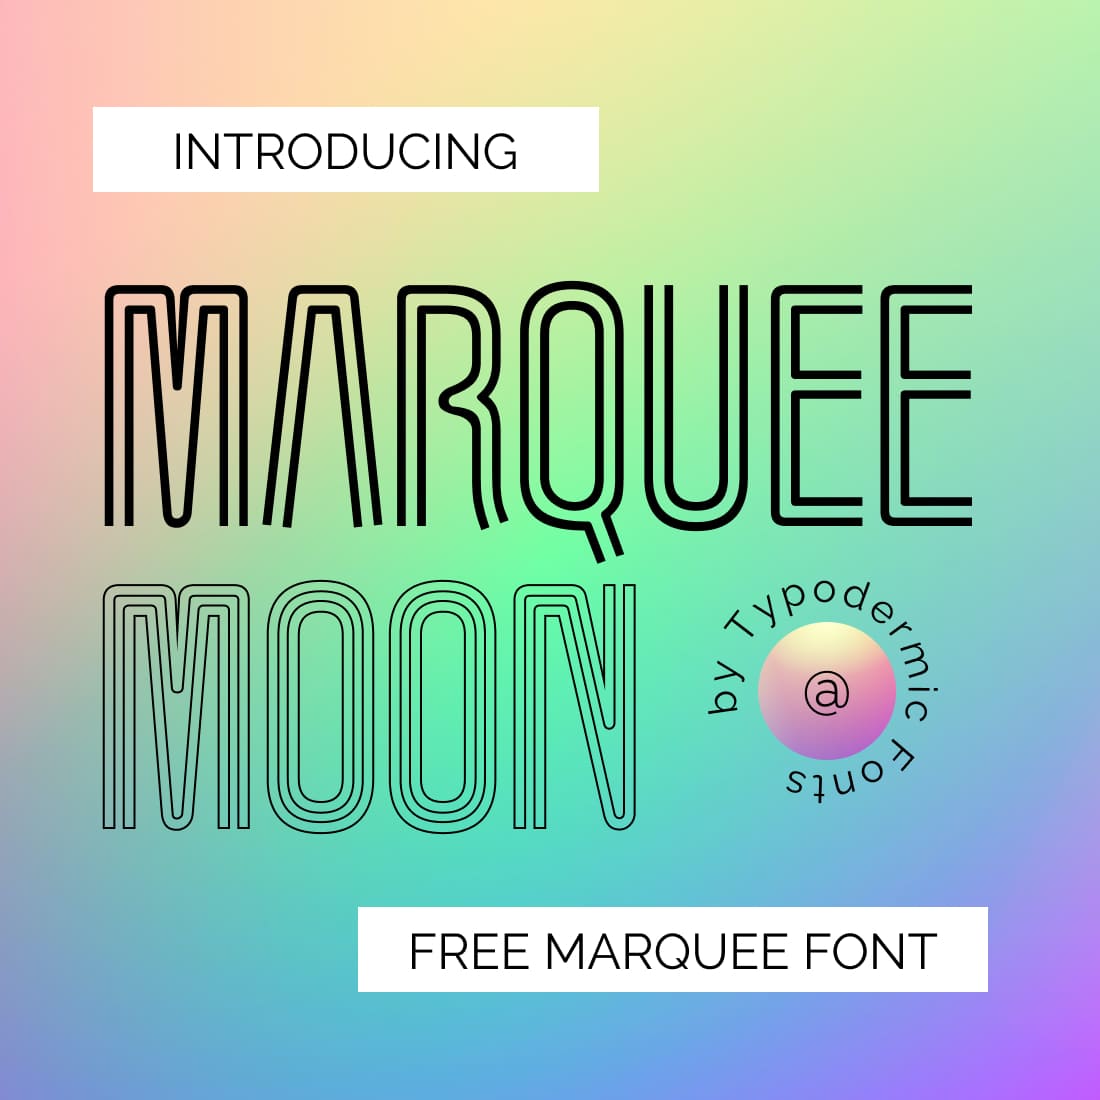 Free marquee font main cover preview by MasterBundles.